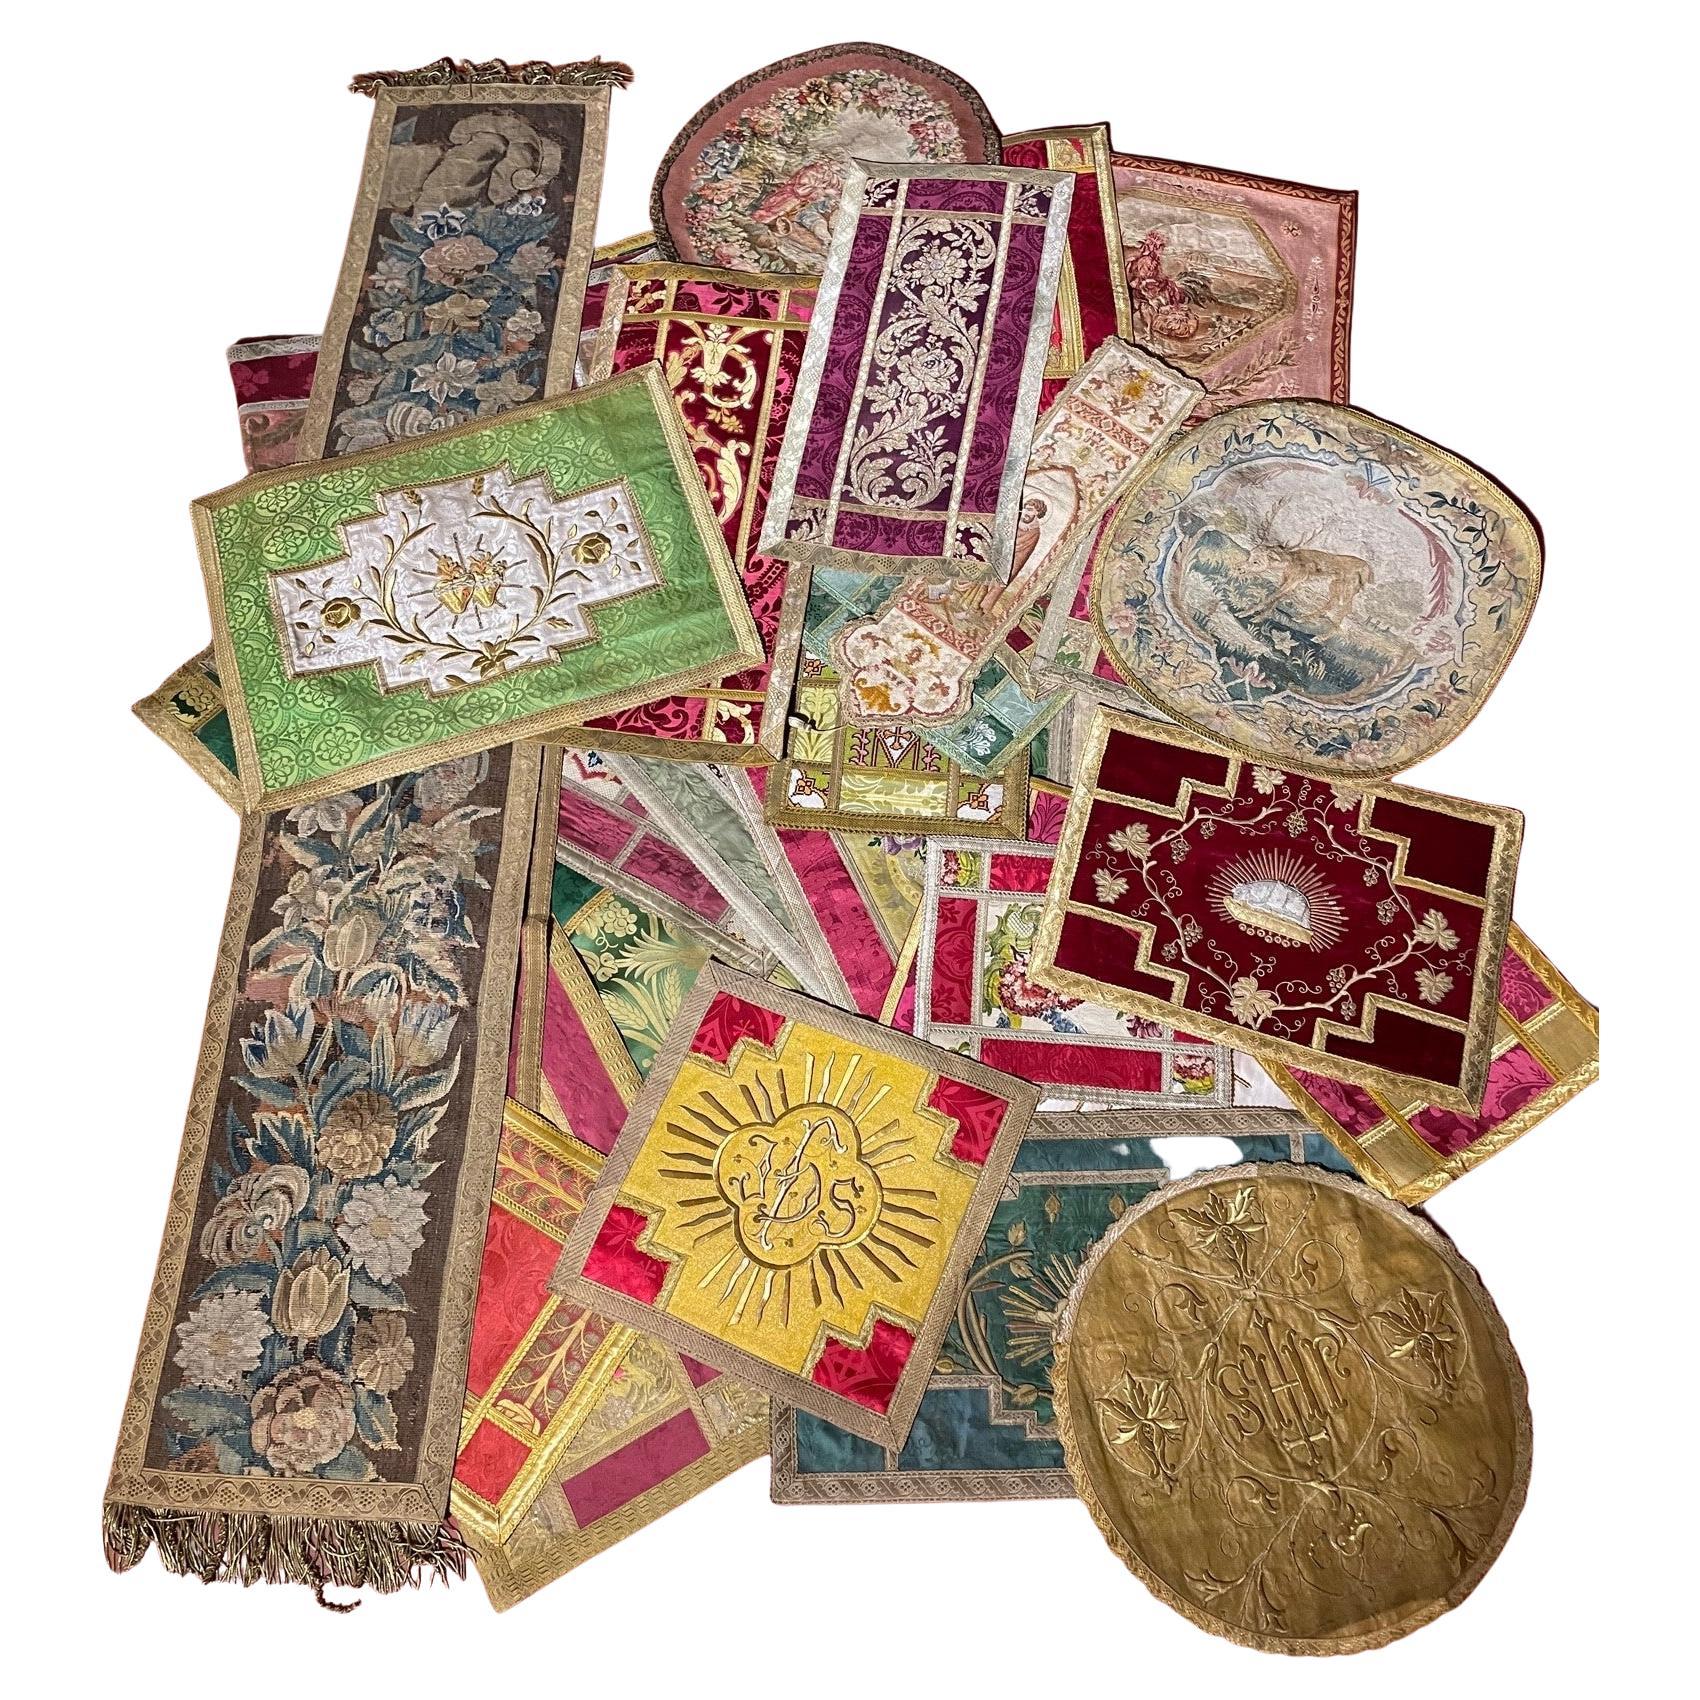 Lot of Table Runners Made from Old Fabrics and Tapestries from the 17-19 Century